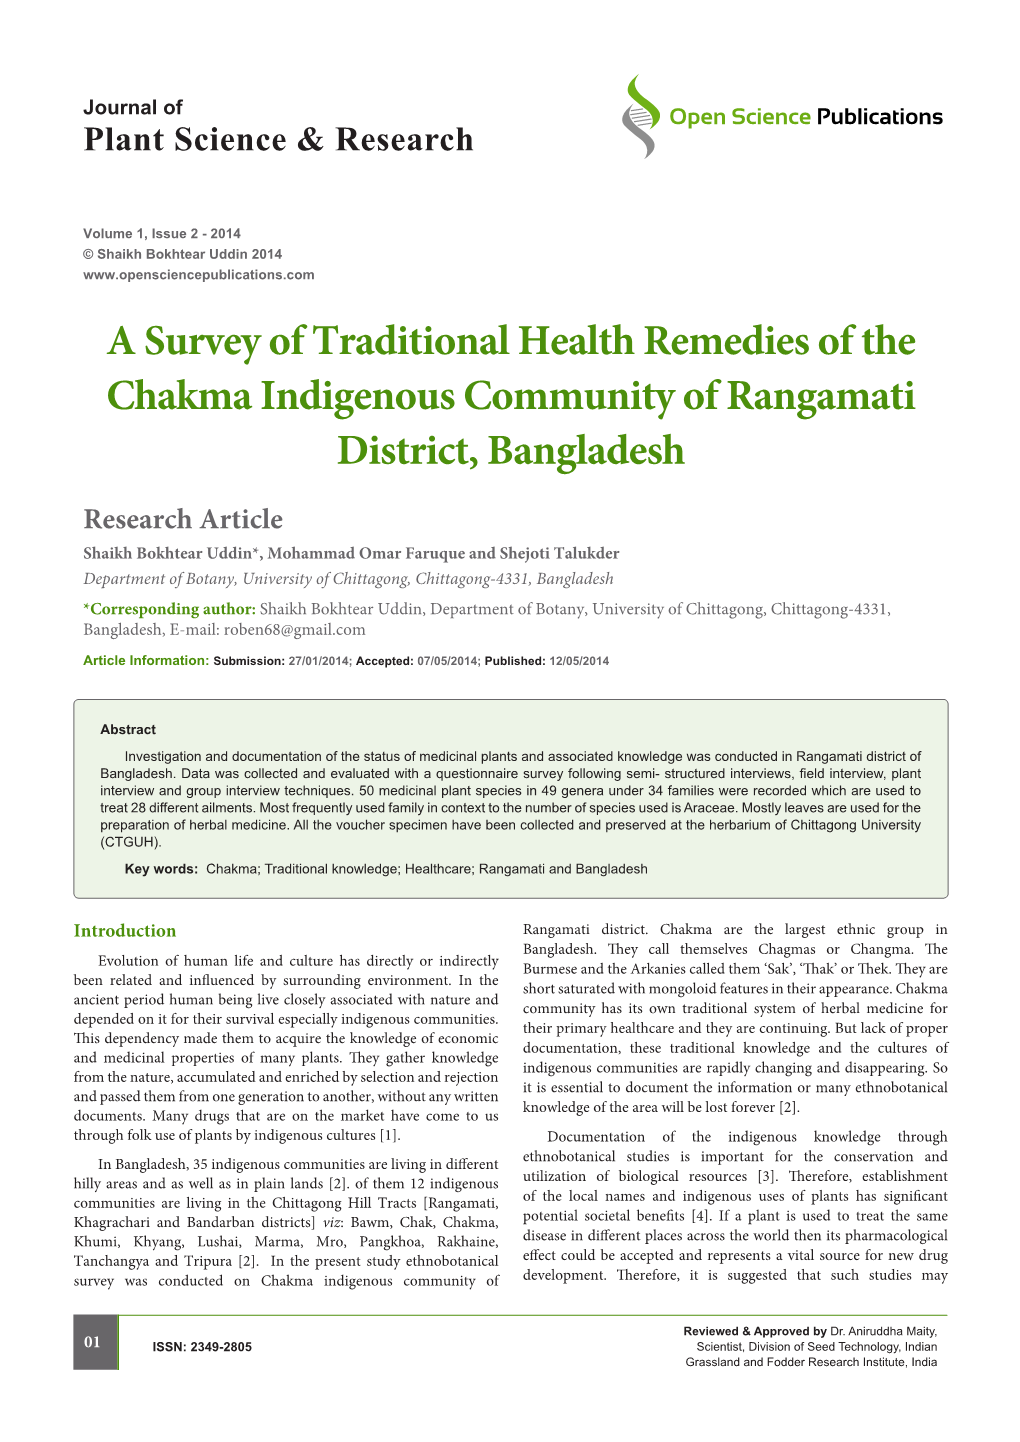 A Survey of Traditional Health Remedies of the Chakma Indigenous Community of Rangamati District, Bangladesh